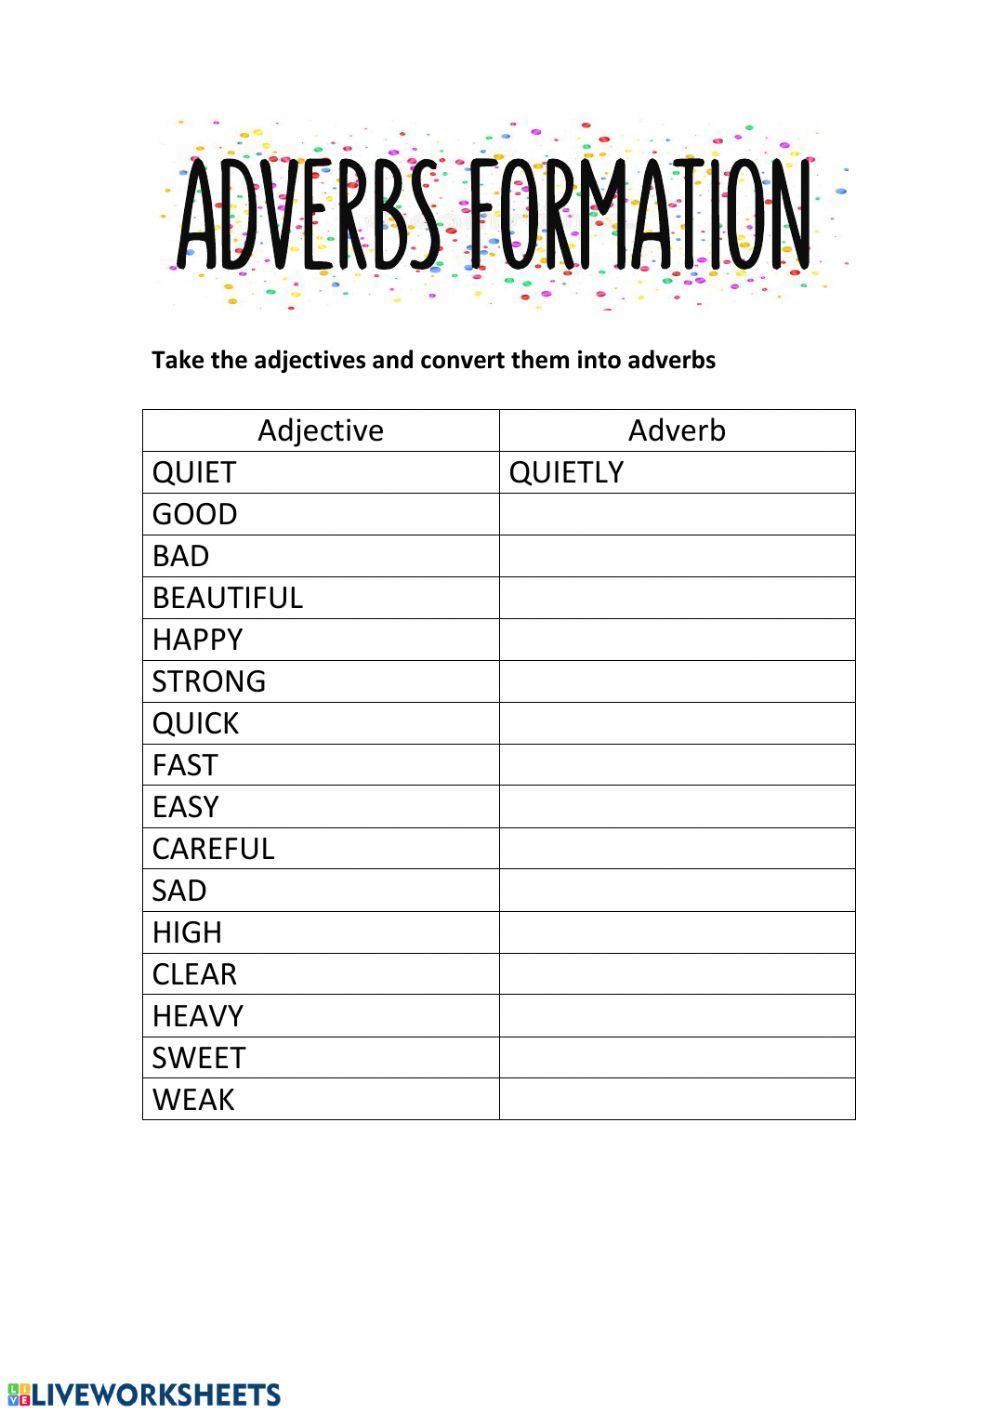 Adverbs formation